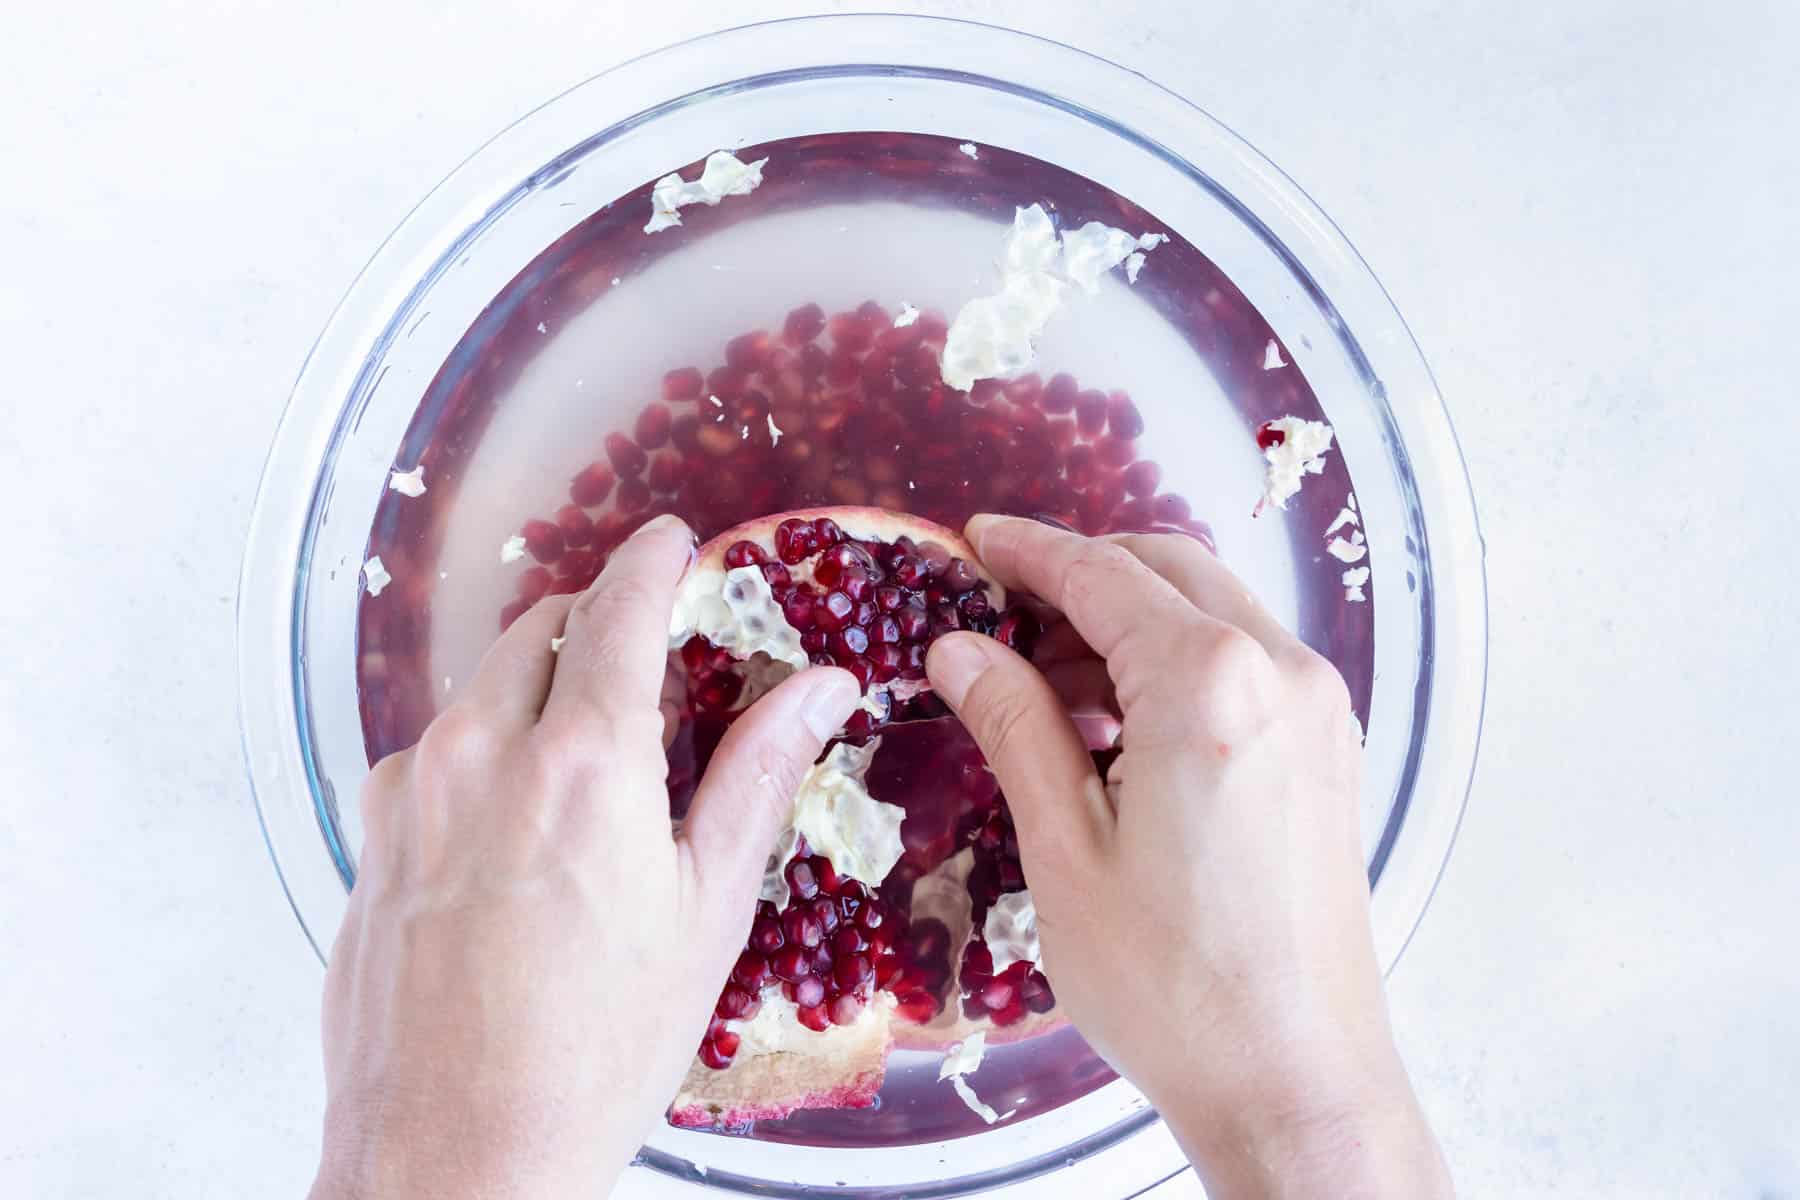 Using your hands, the seeds are removed from the pomegranate skin.